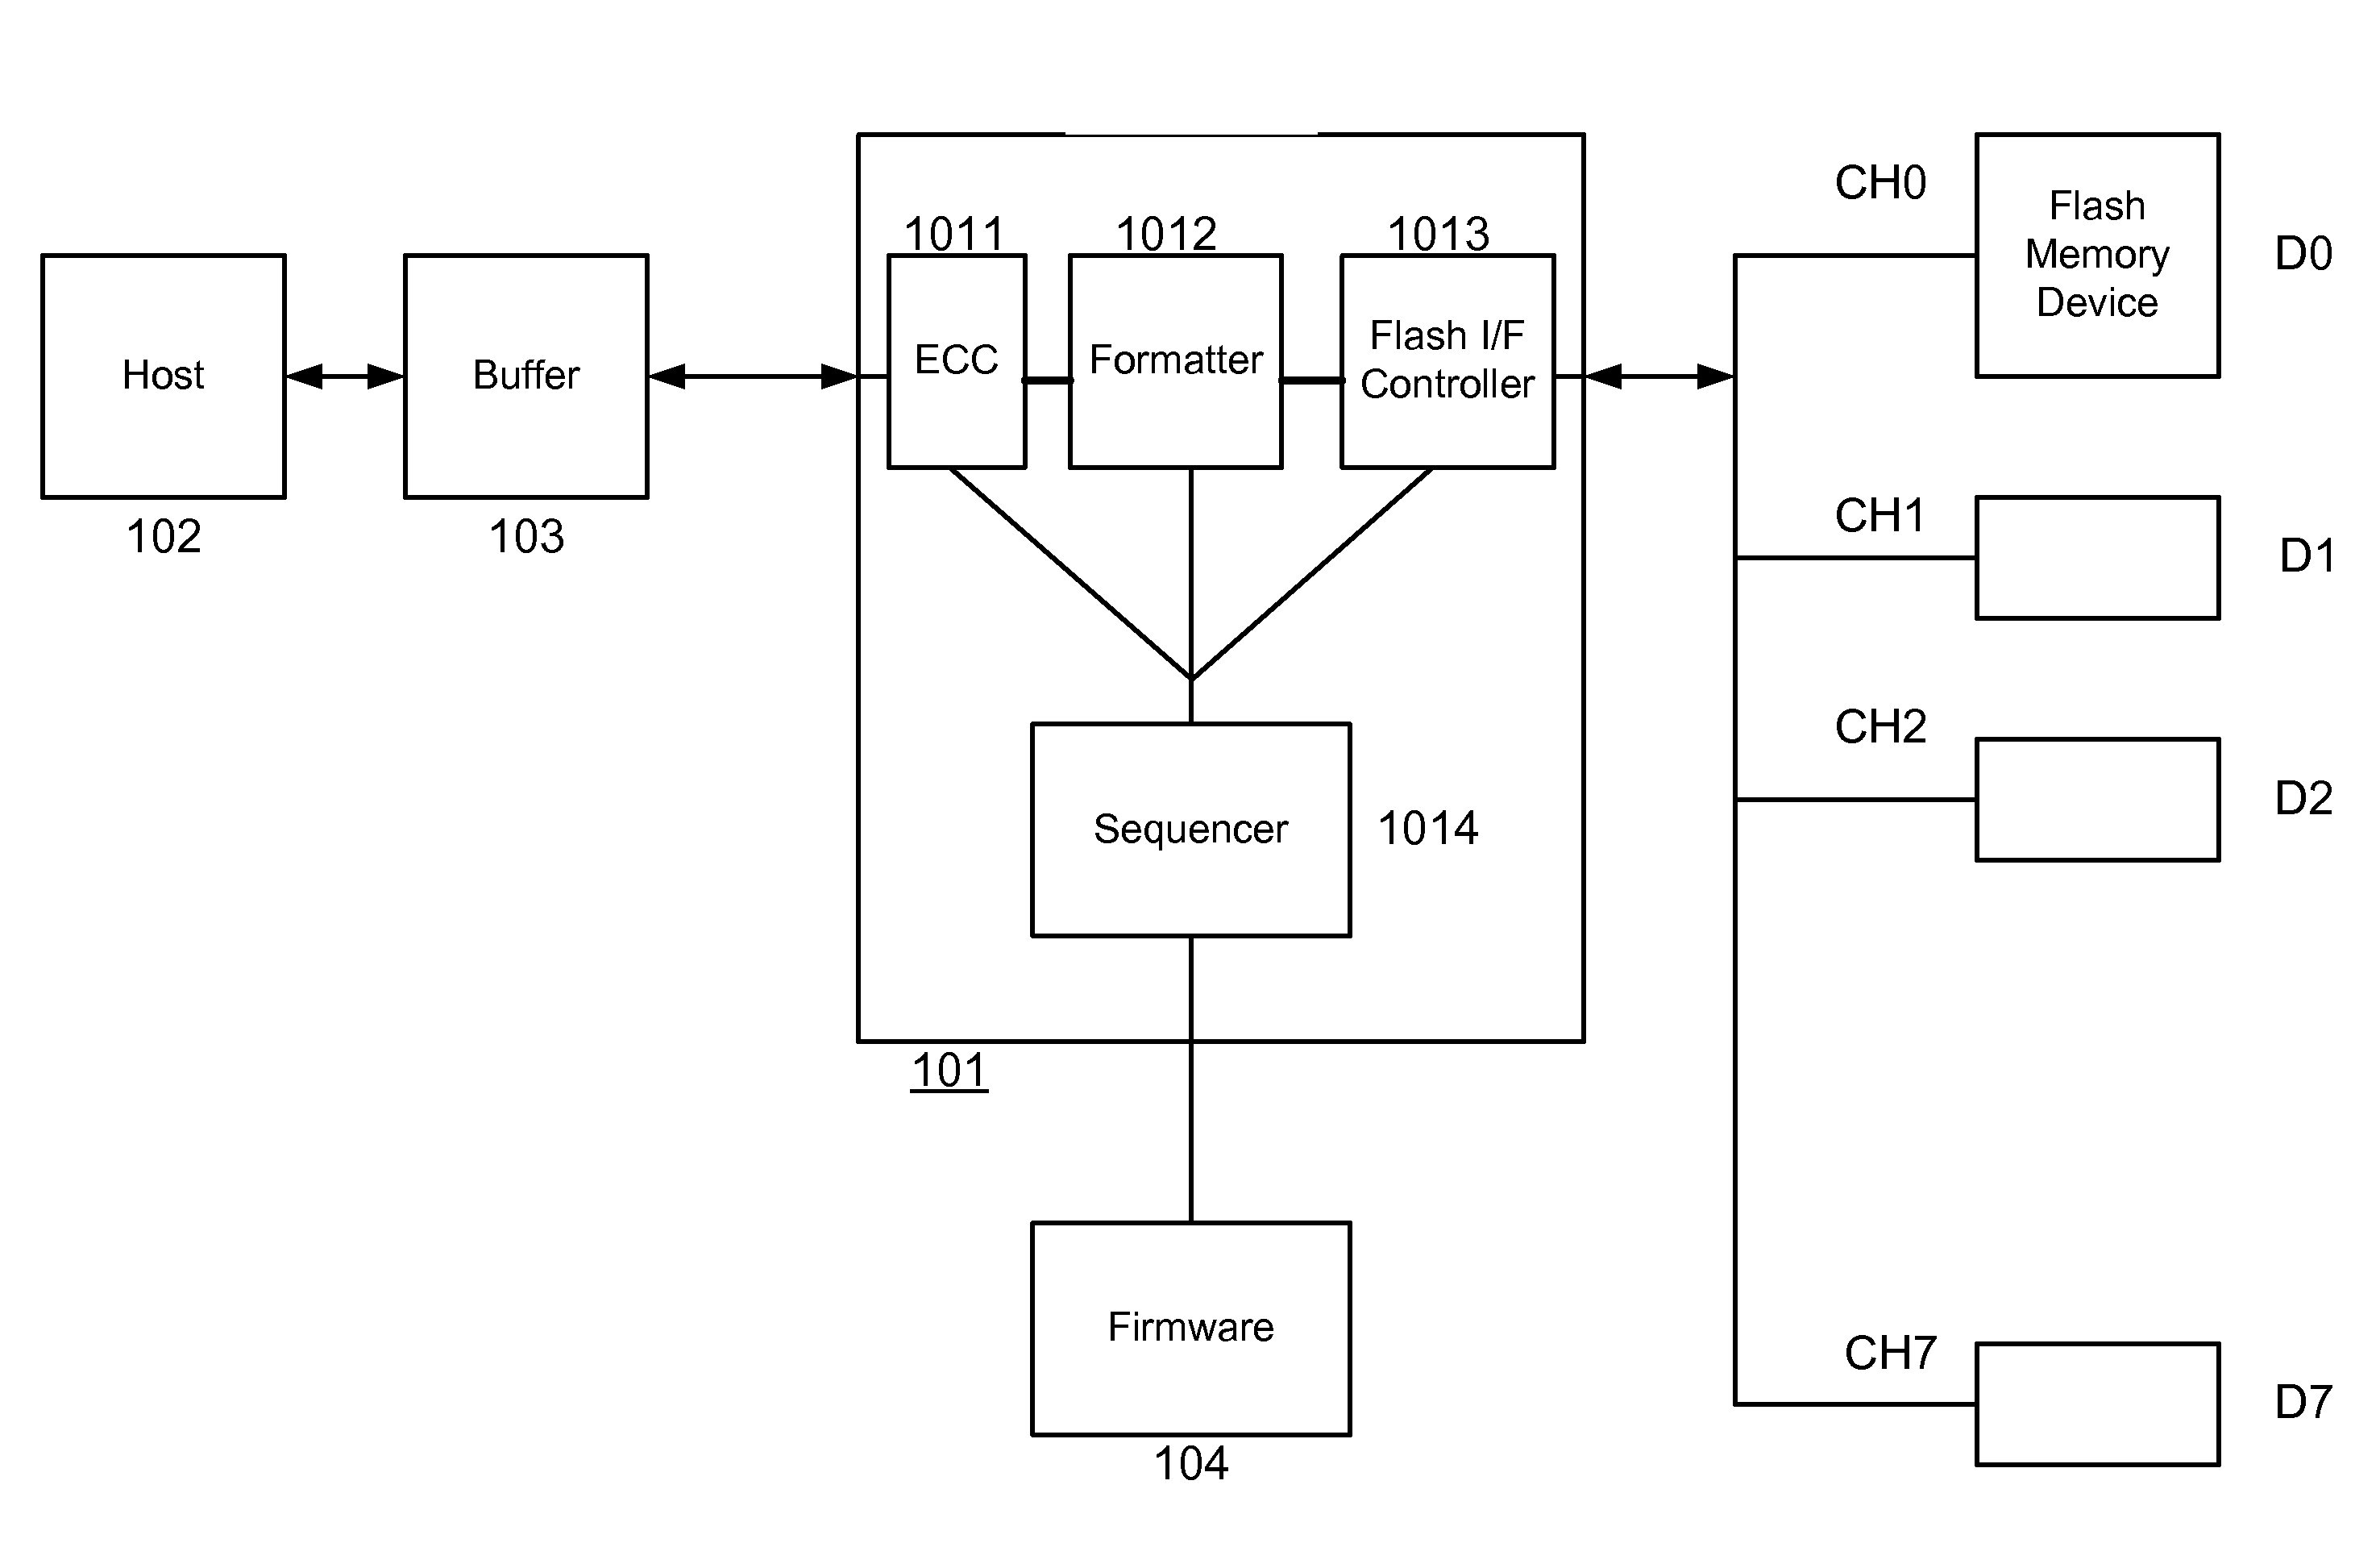 Flexible sequencer design architecture for solid state memory controller